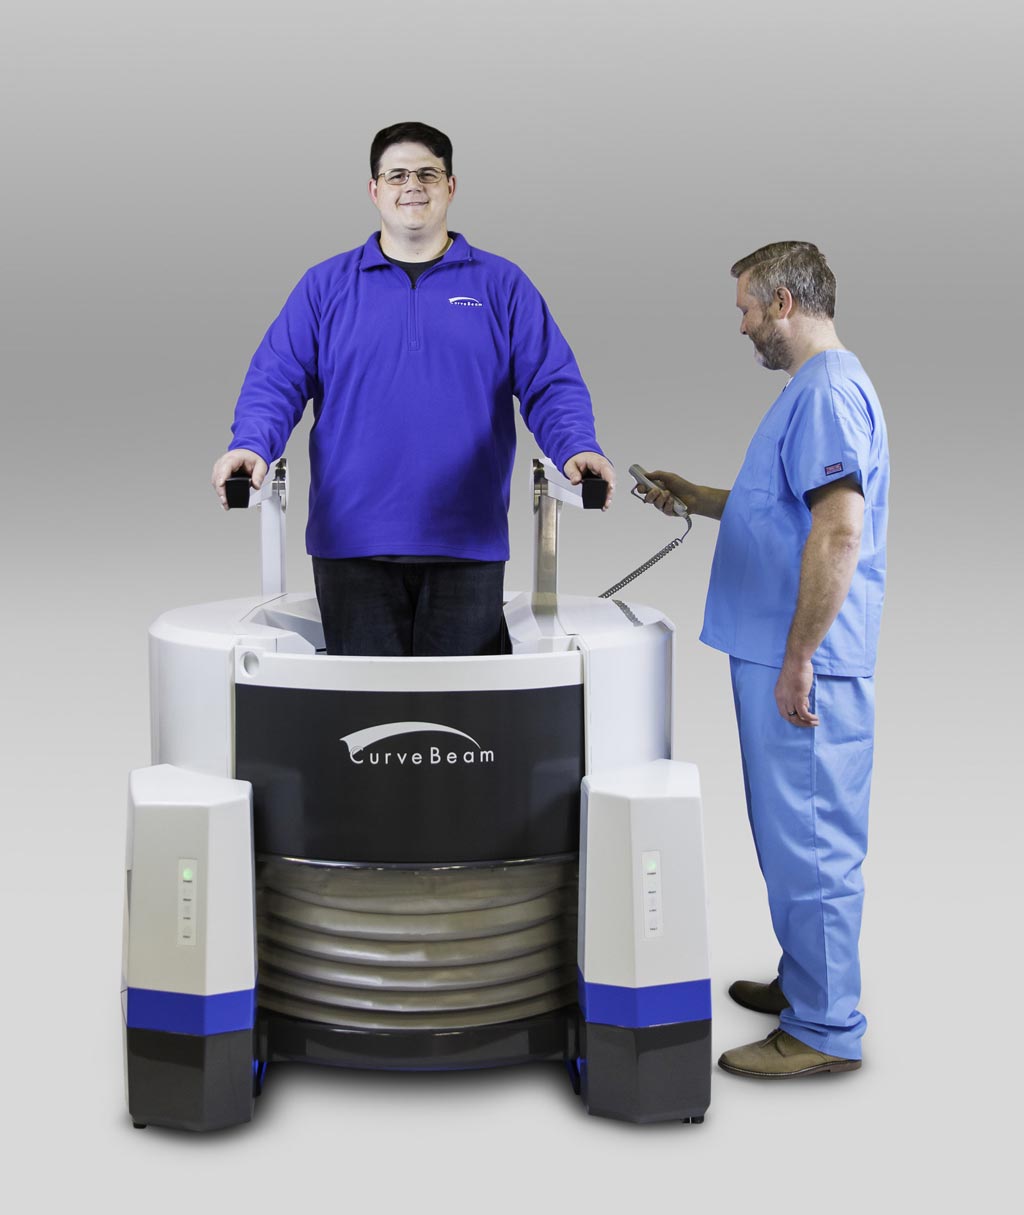 Image: The LineUP orthopedic extremity CT system (Photo courtesy of CurveBeam).